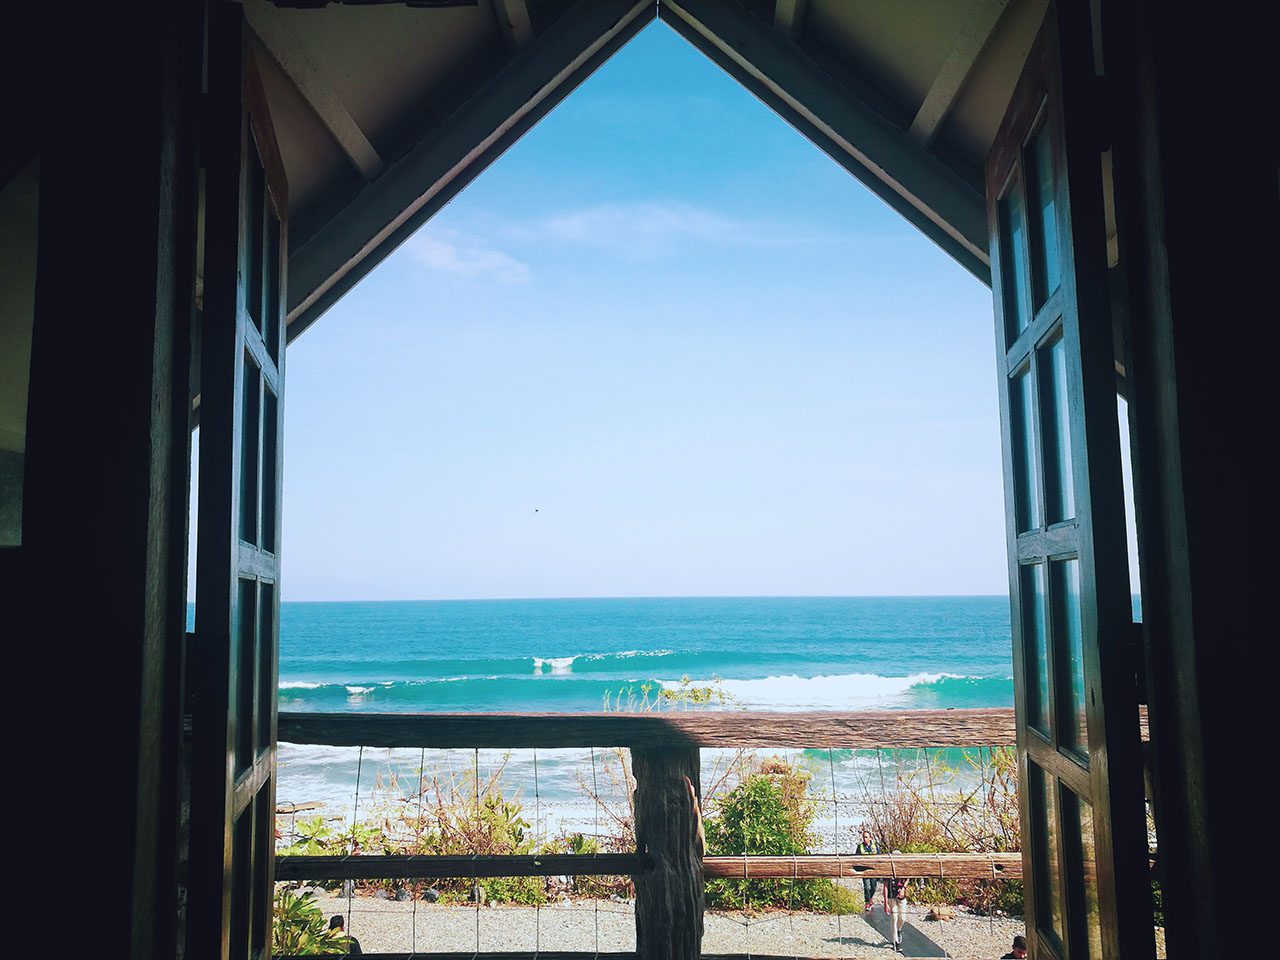 ROOM WITH A VIEW. The view of the sea from Bahay na Bato. Photo courtesy of Laurie Mae Gucilatar, Joms Santos, and Eleazar Cuela 